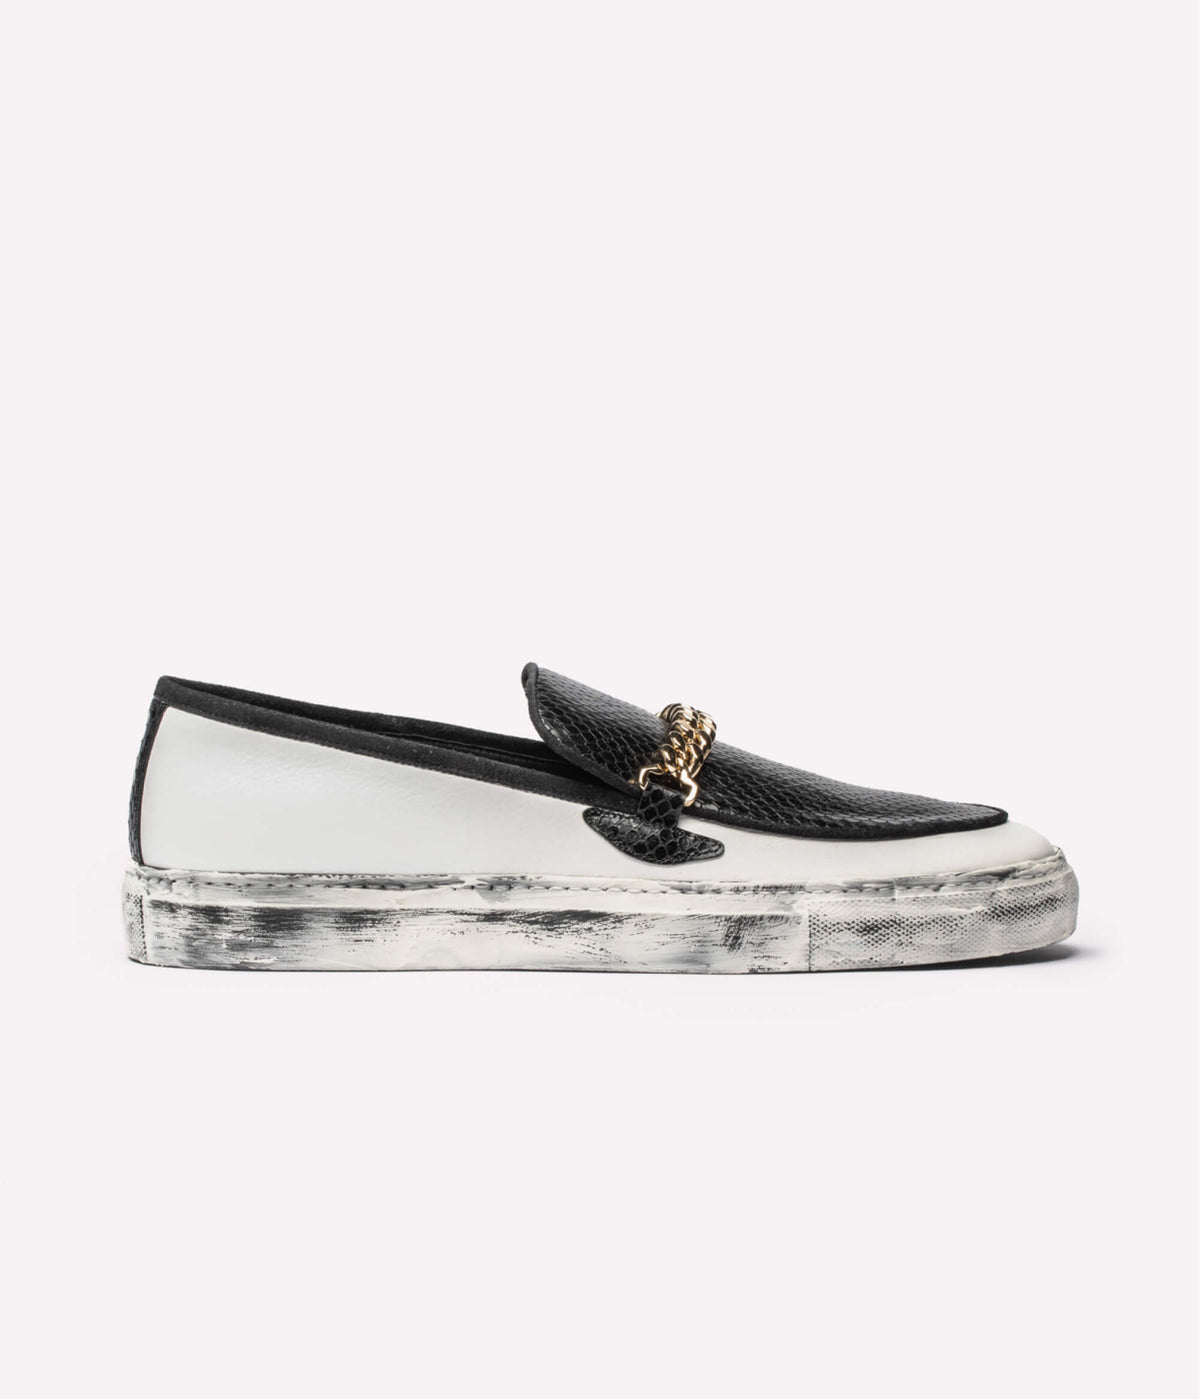 HUMAN RECREATIONAL SERVICES EL DORADO WHITE AND BLACK LOAFER WITH A CUBAN LINK CHAIN